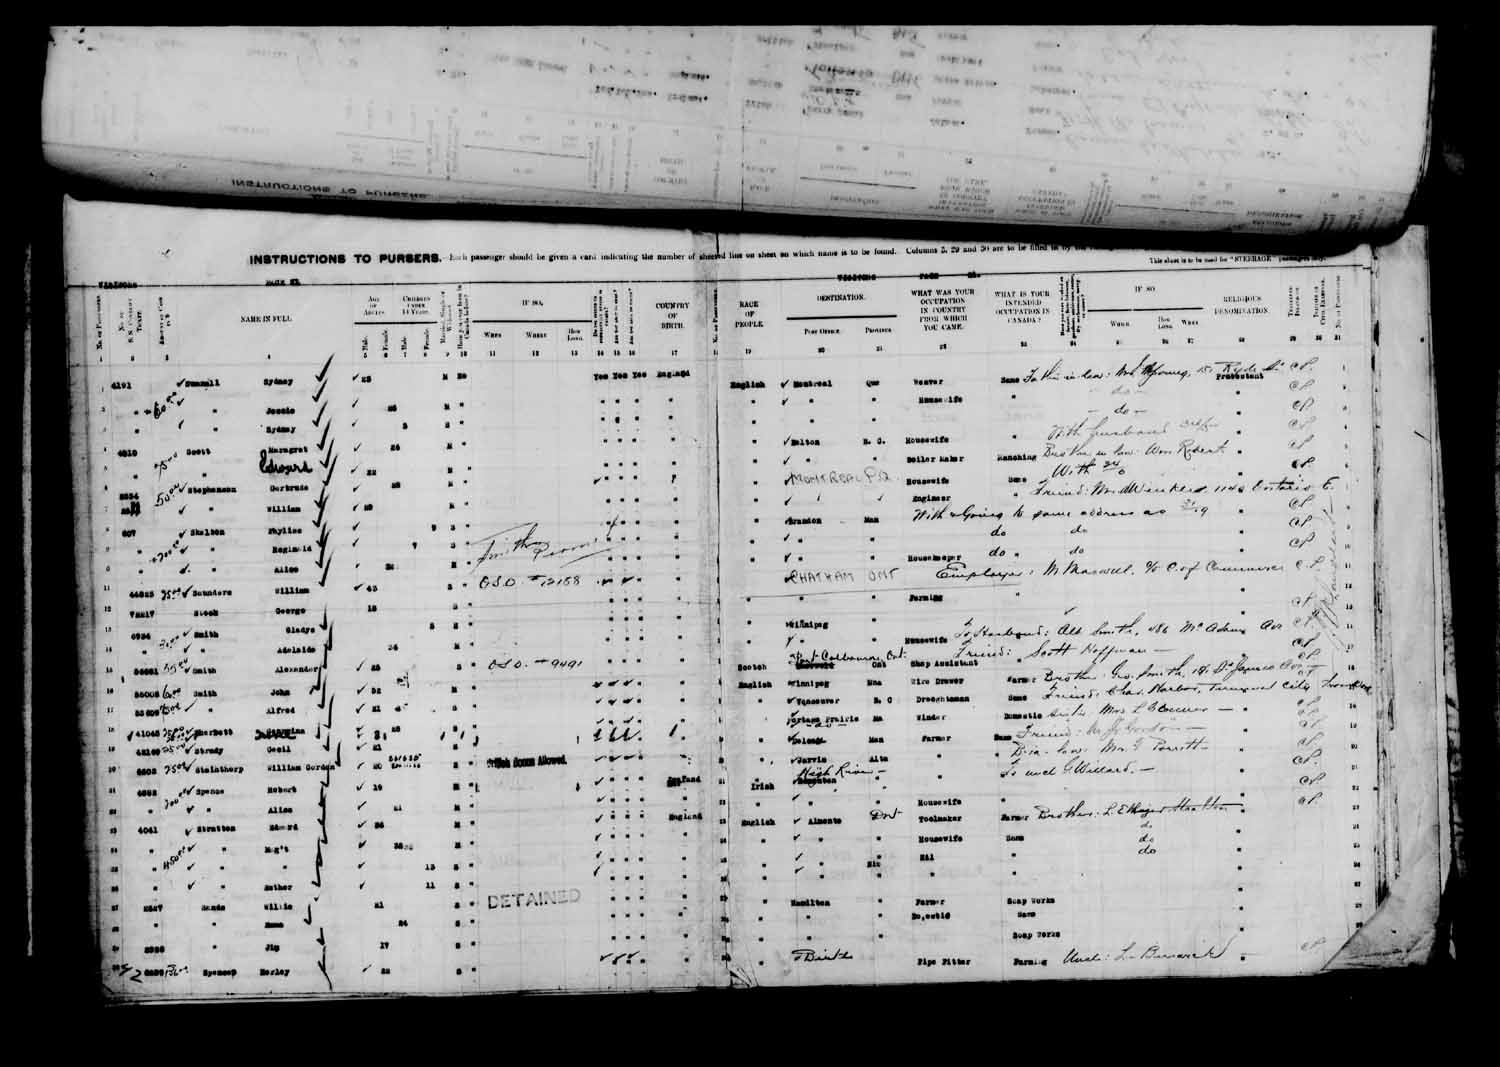 Digitized page of Passenger Lists for Image No.: e003610661